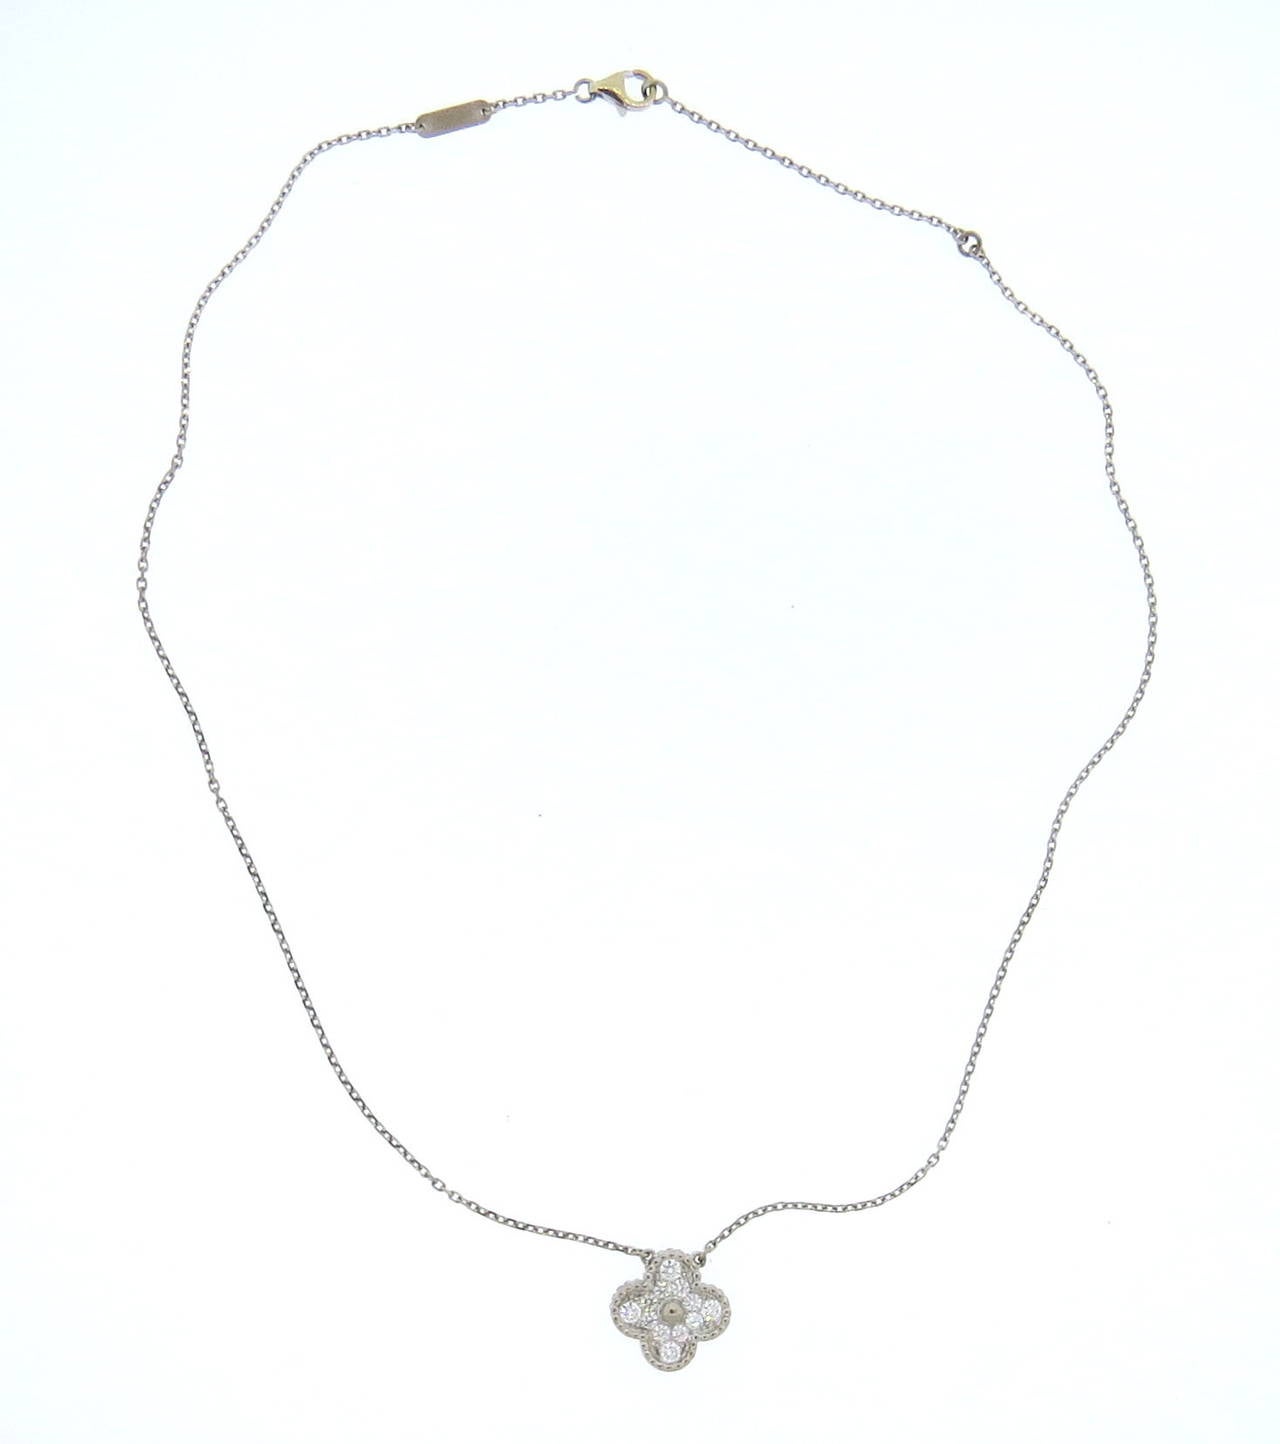 Van Cleef Arpels 18k white gold necklace with signature Vintage Alhambra pendant, set with diamonds. Necklace is 17